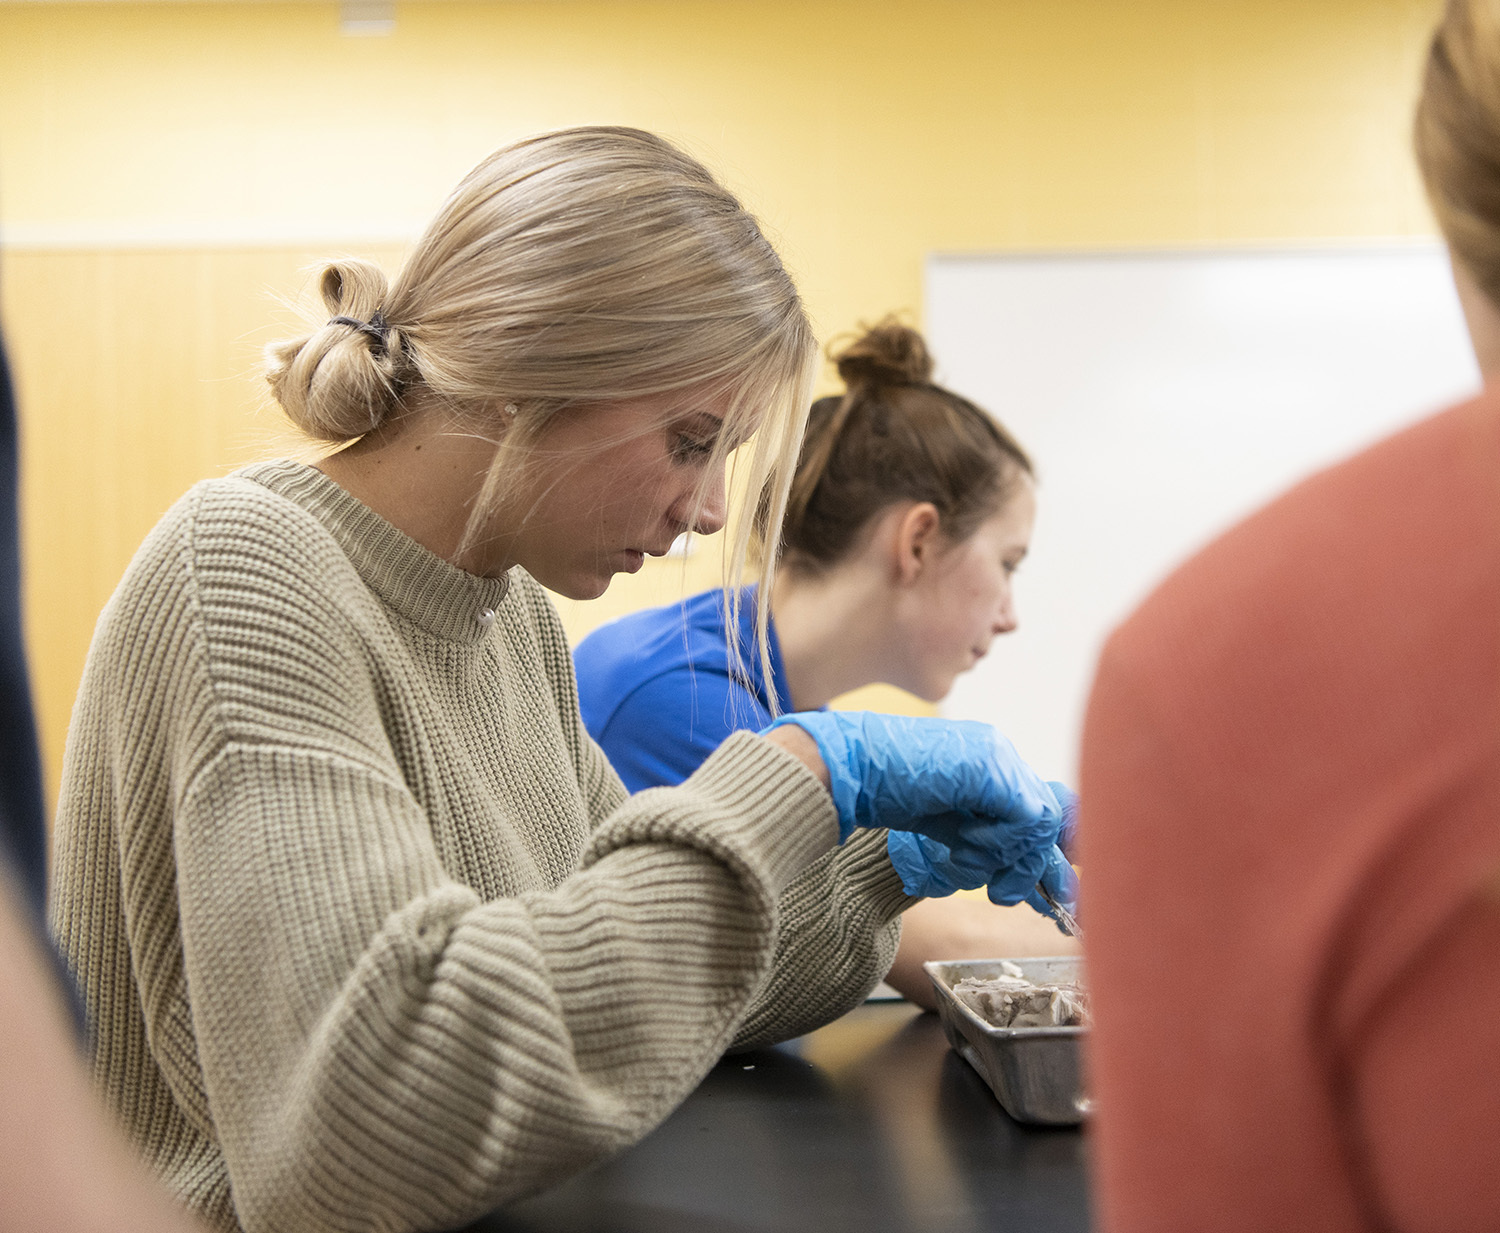 Female student in sweater examining parts in pan